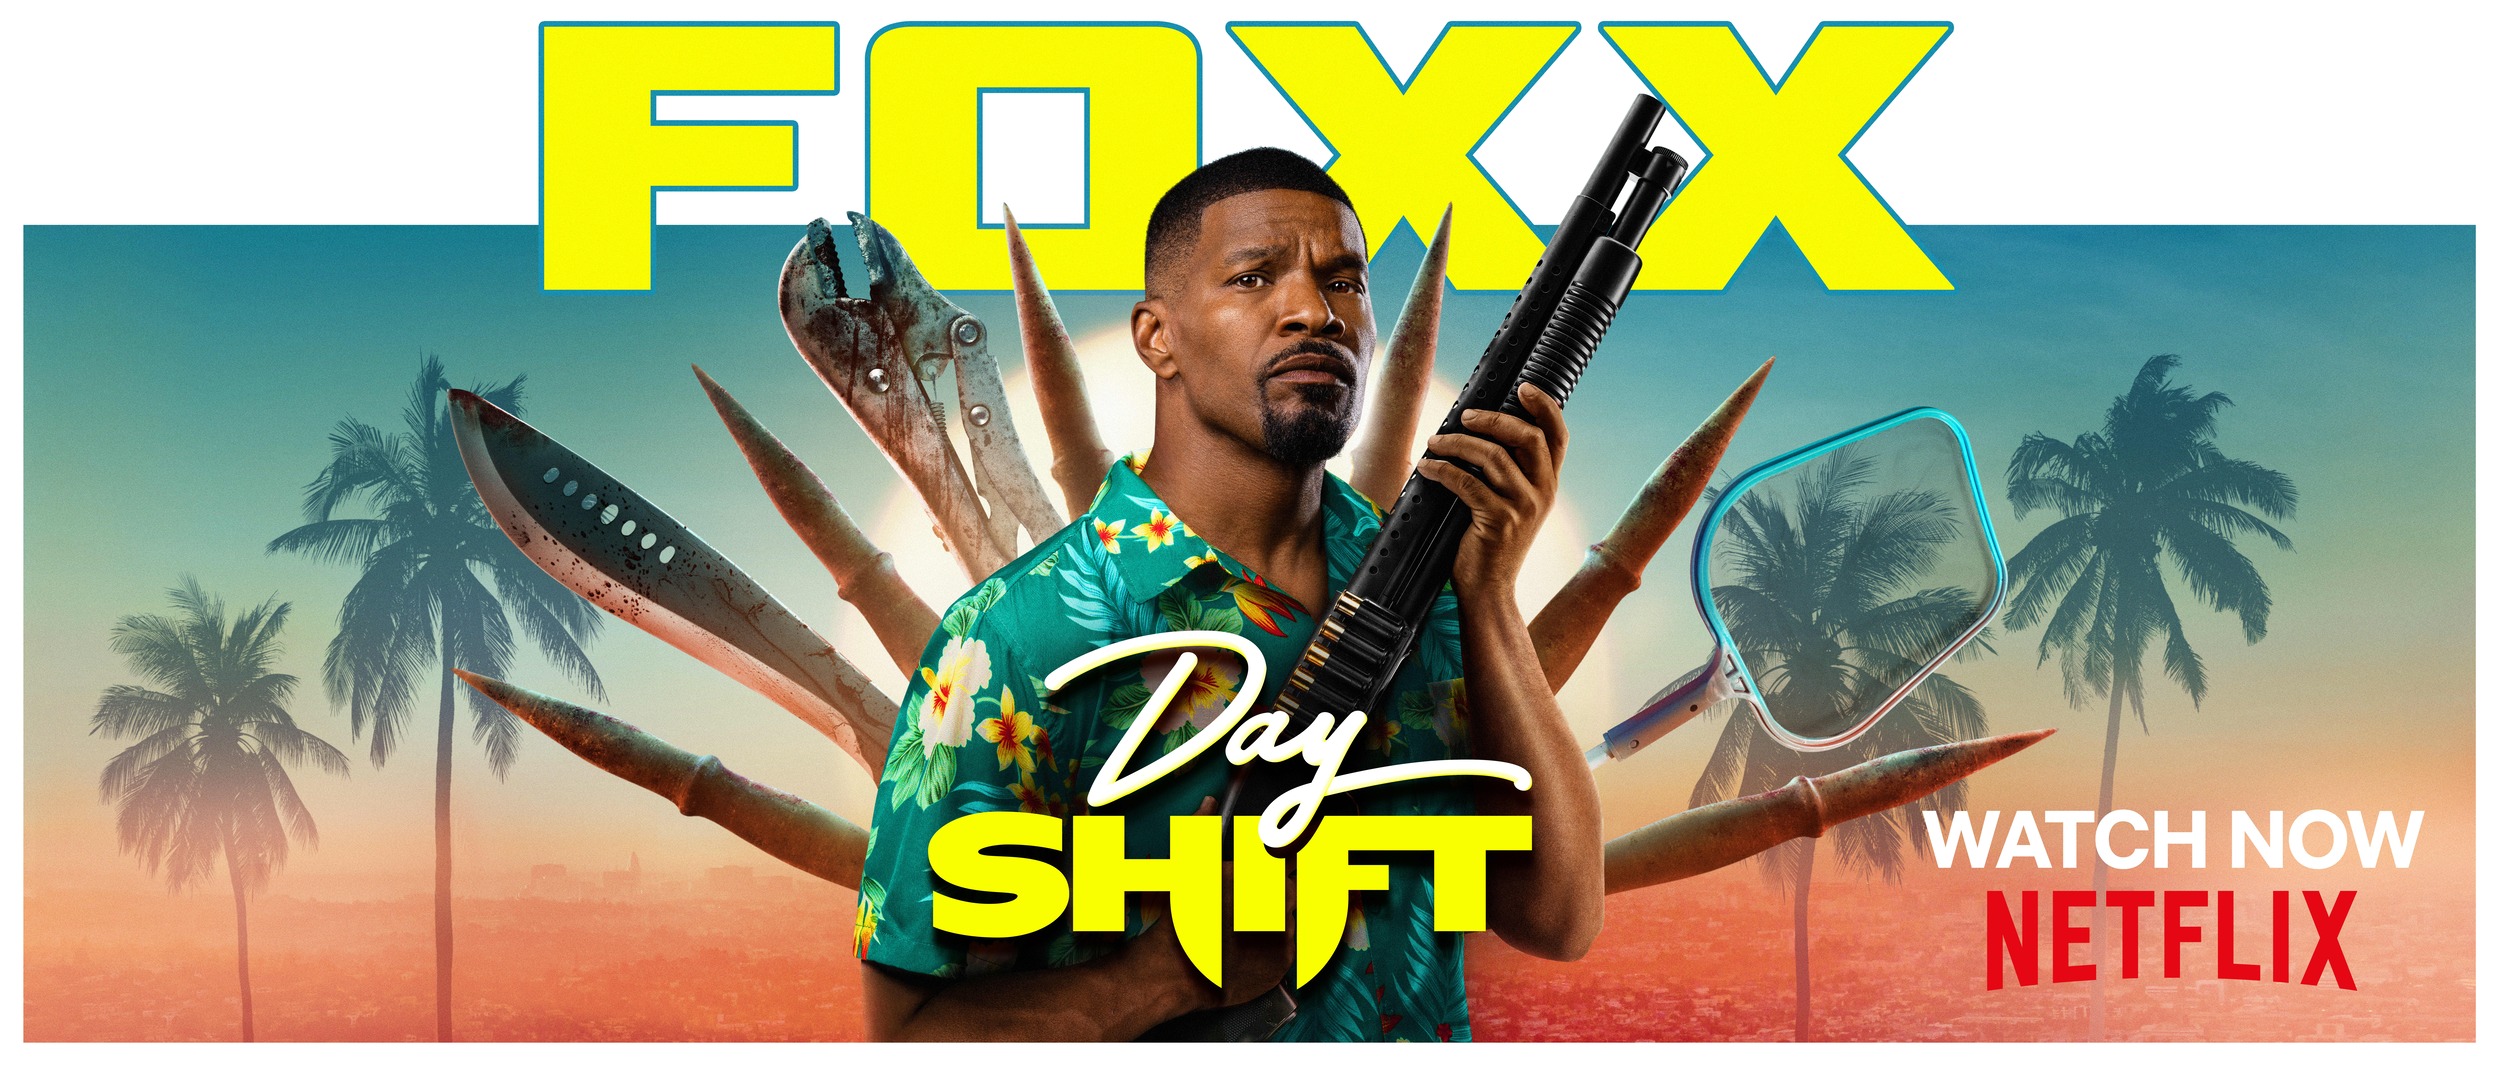 Mega Sized Movie Poster Image for Day Shift (#12 of 13)